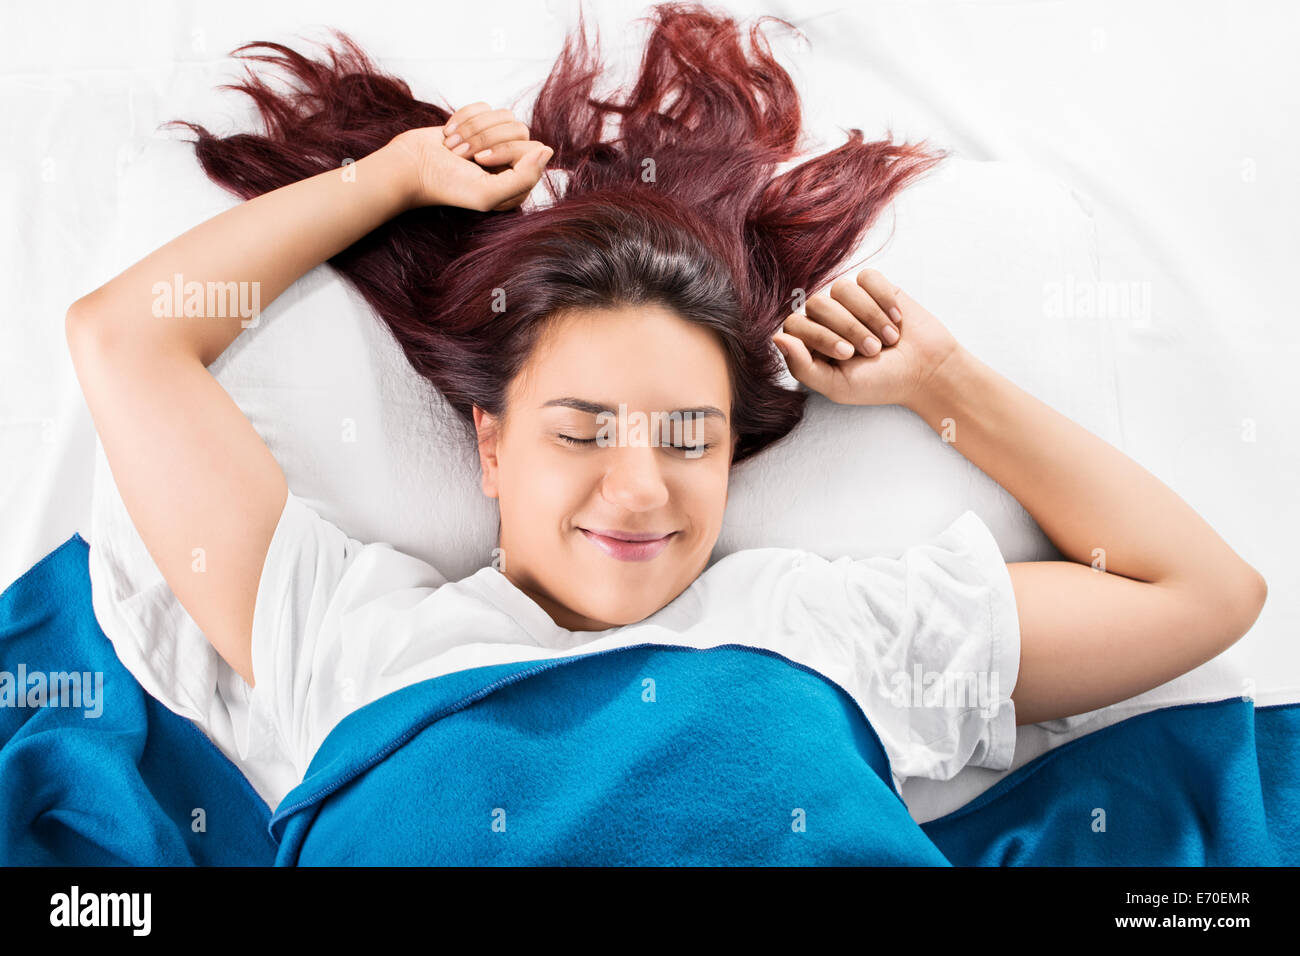 Close up of a beautiful smiling young girl waking up fresh and stretching in bed, isolated on white background. Stock Photo